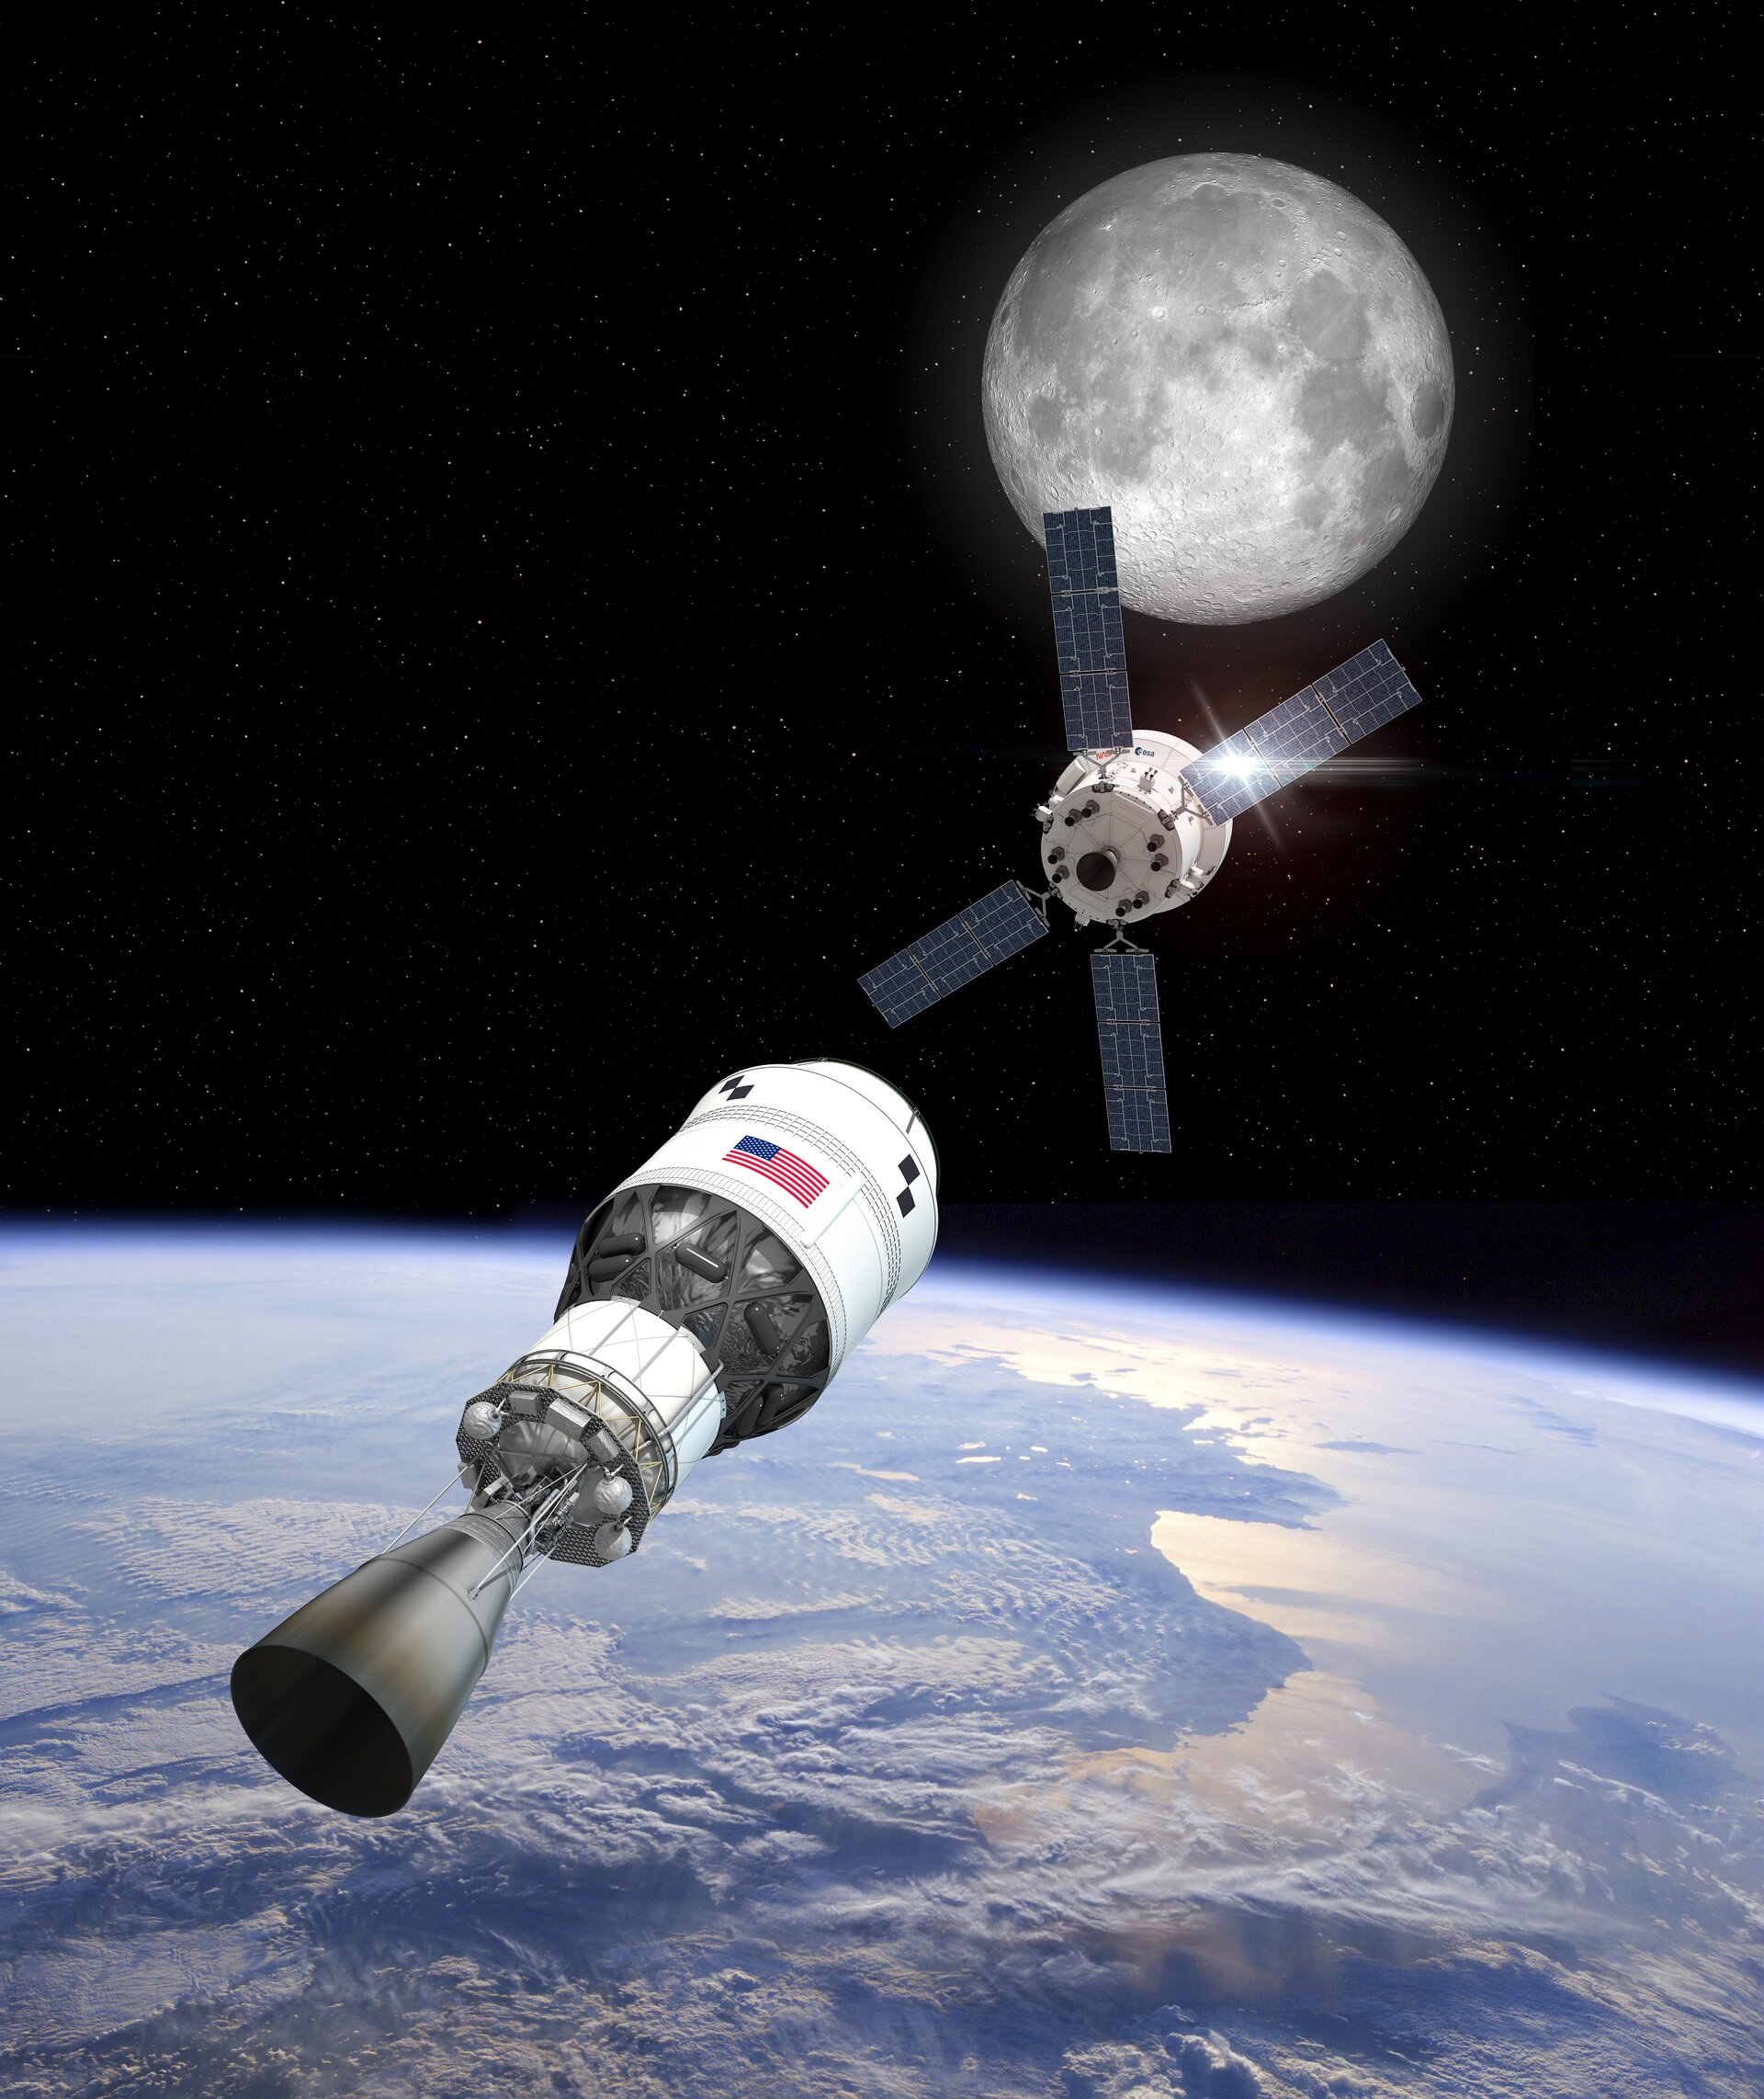 European Service Module on its way to the Moon